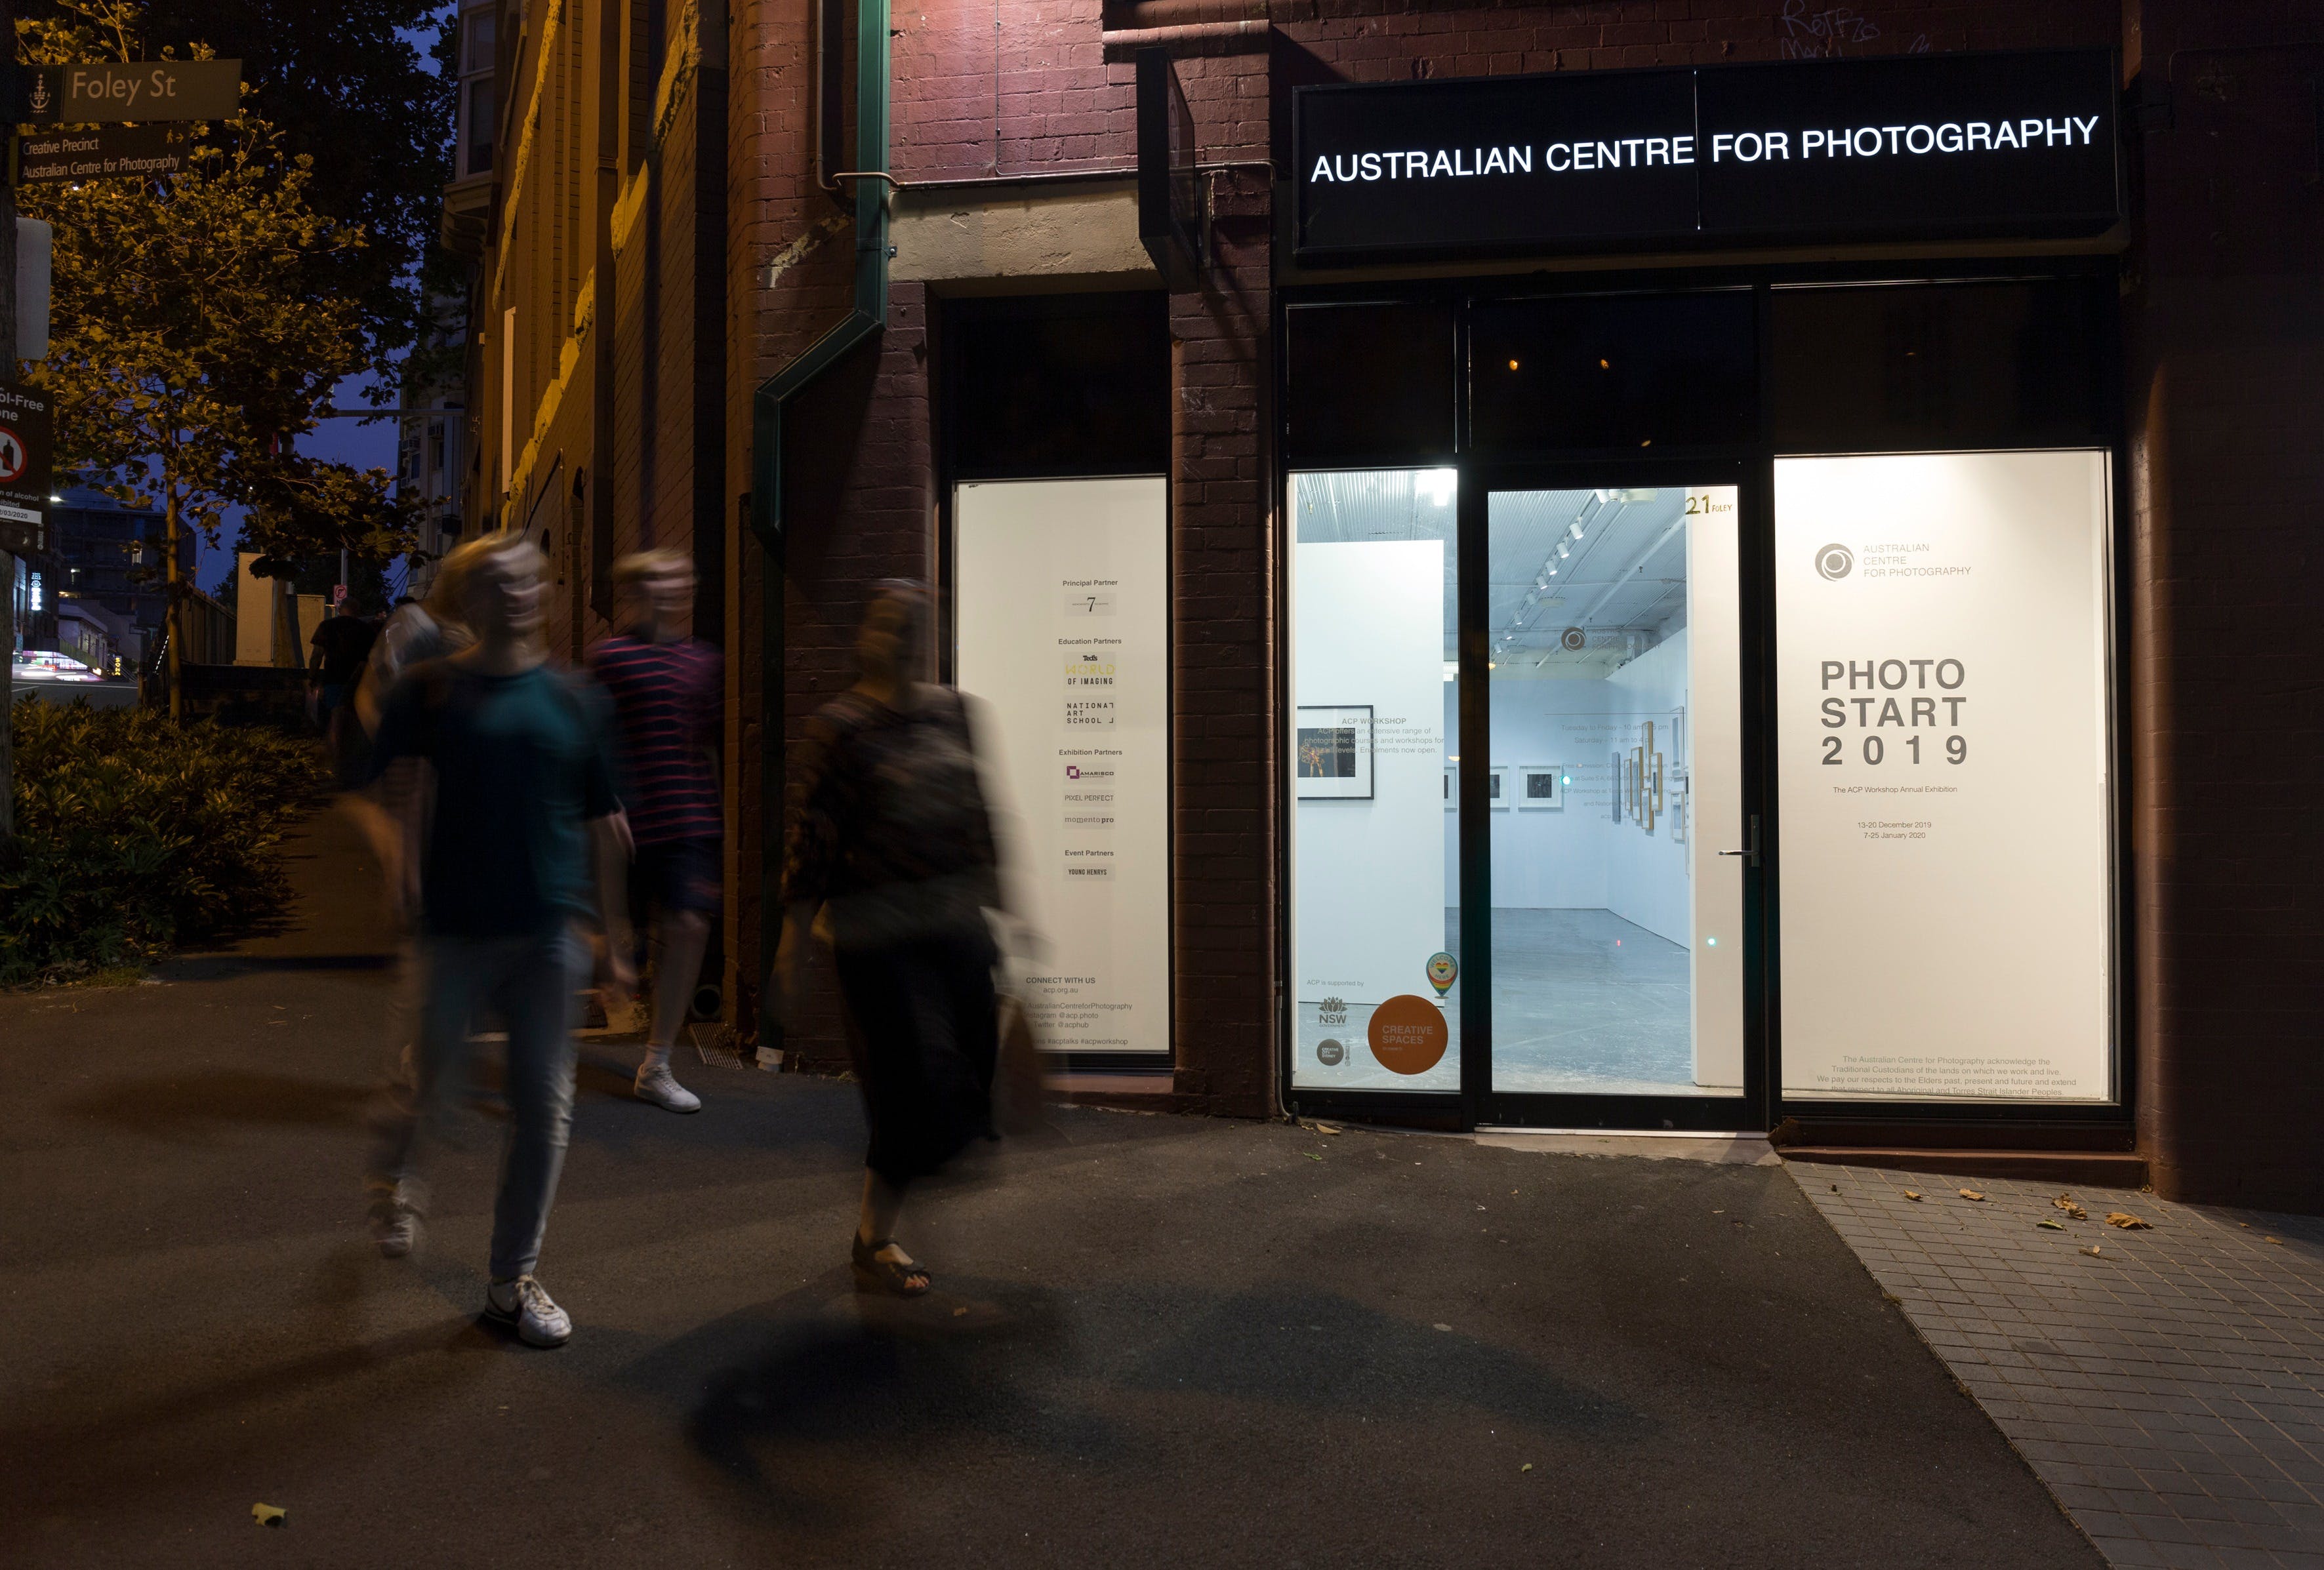 Australian Centre for Photography - Accommodation Directory